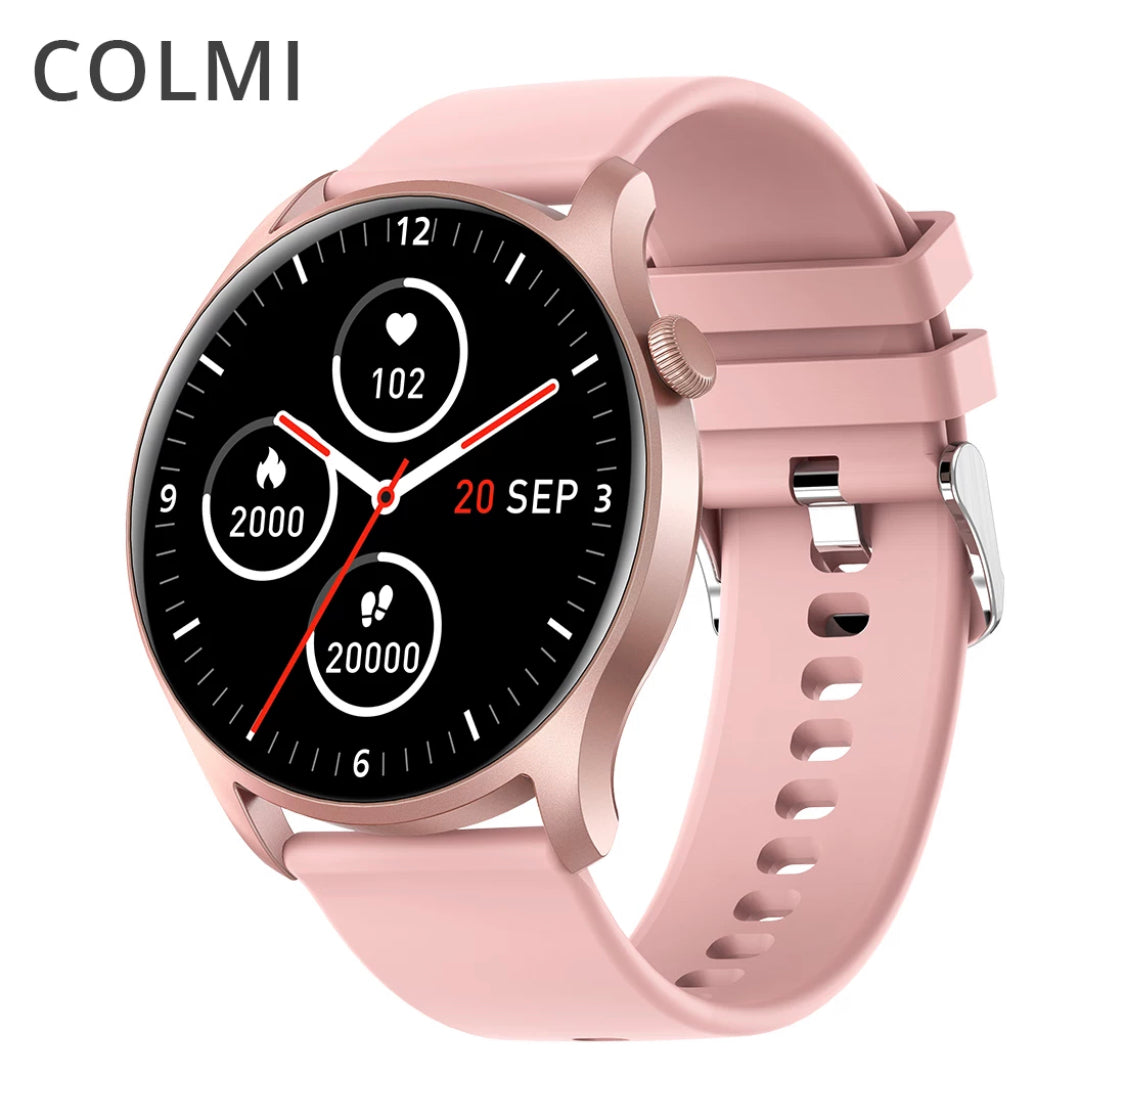 COlMI SKY 8 with music - Smart Watch South Africa 